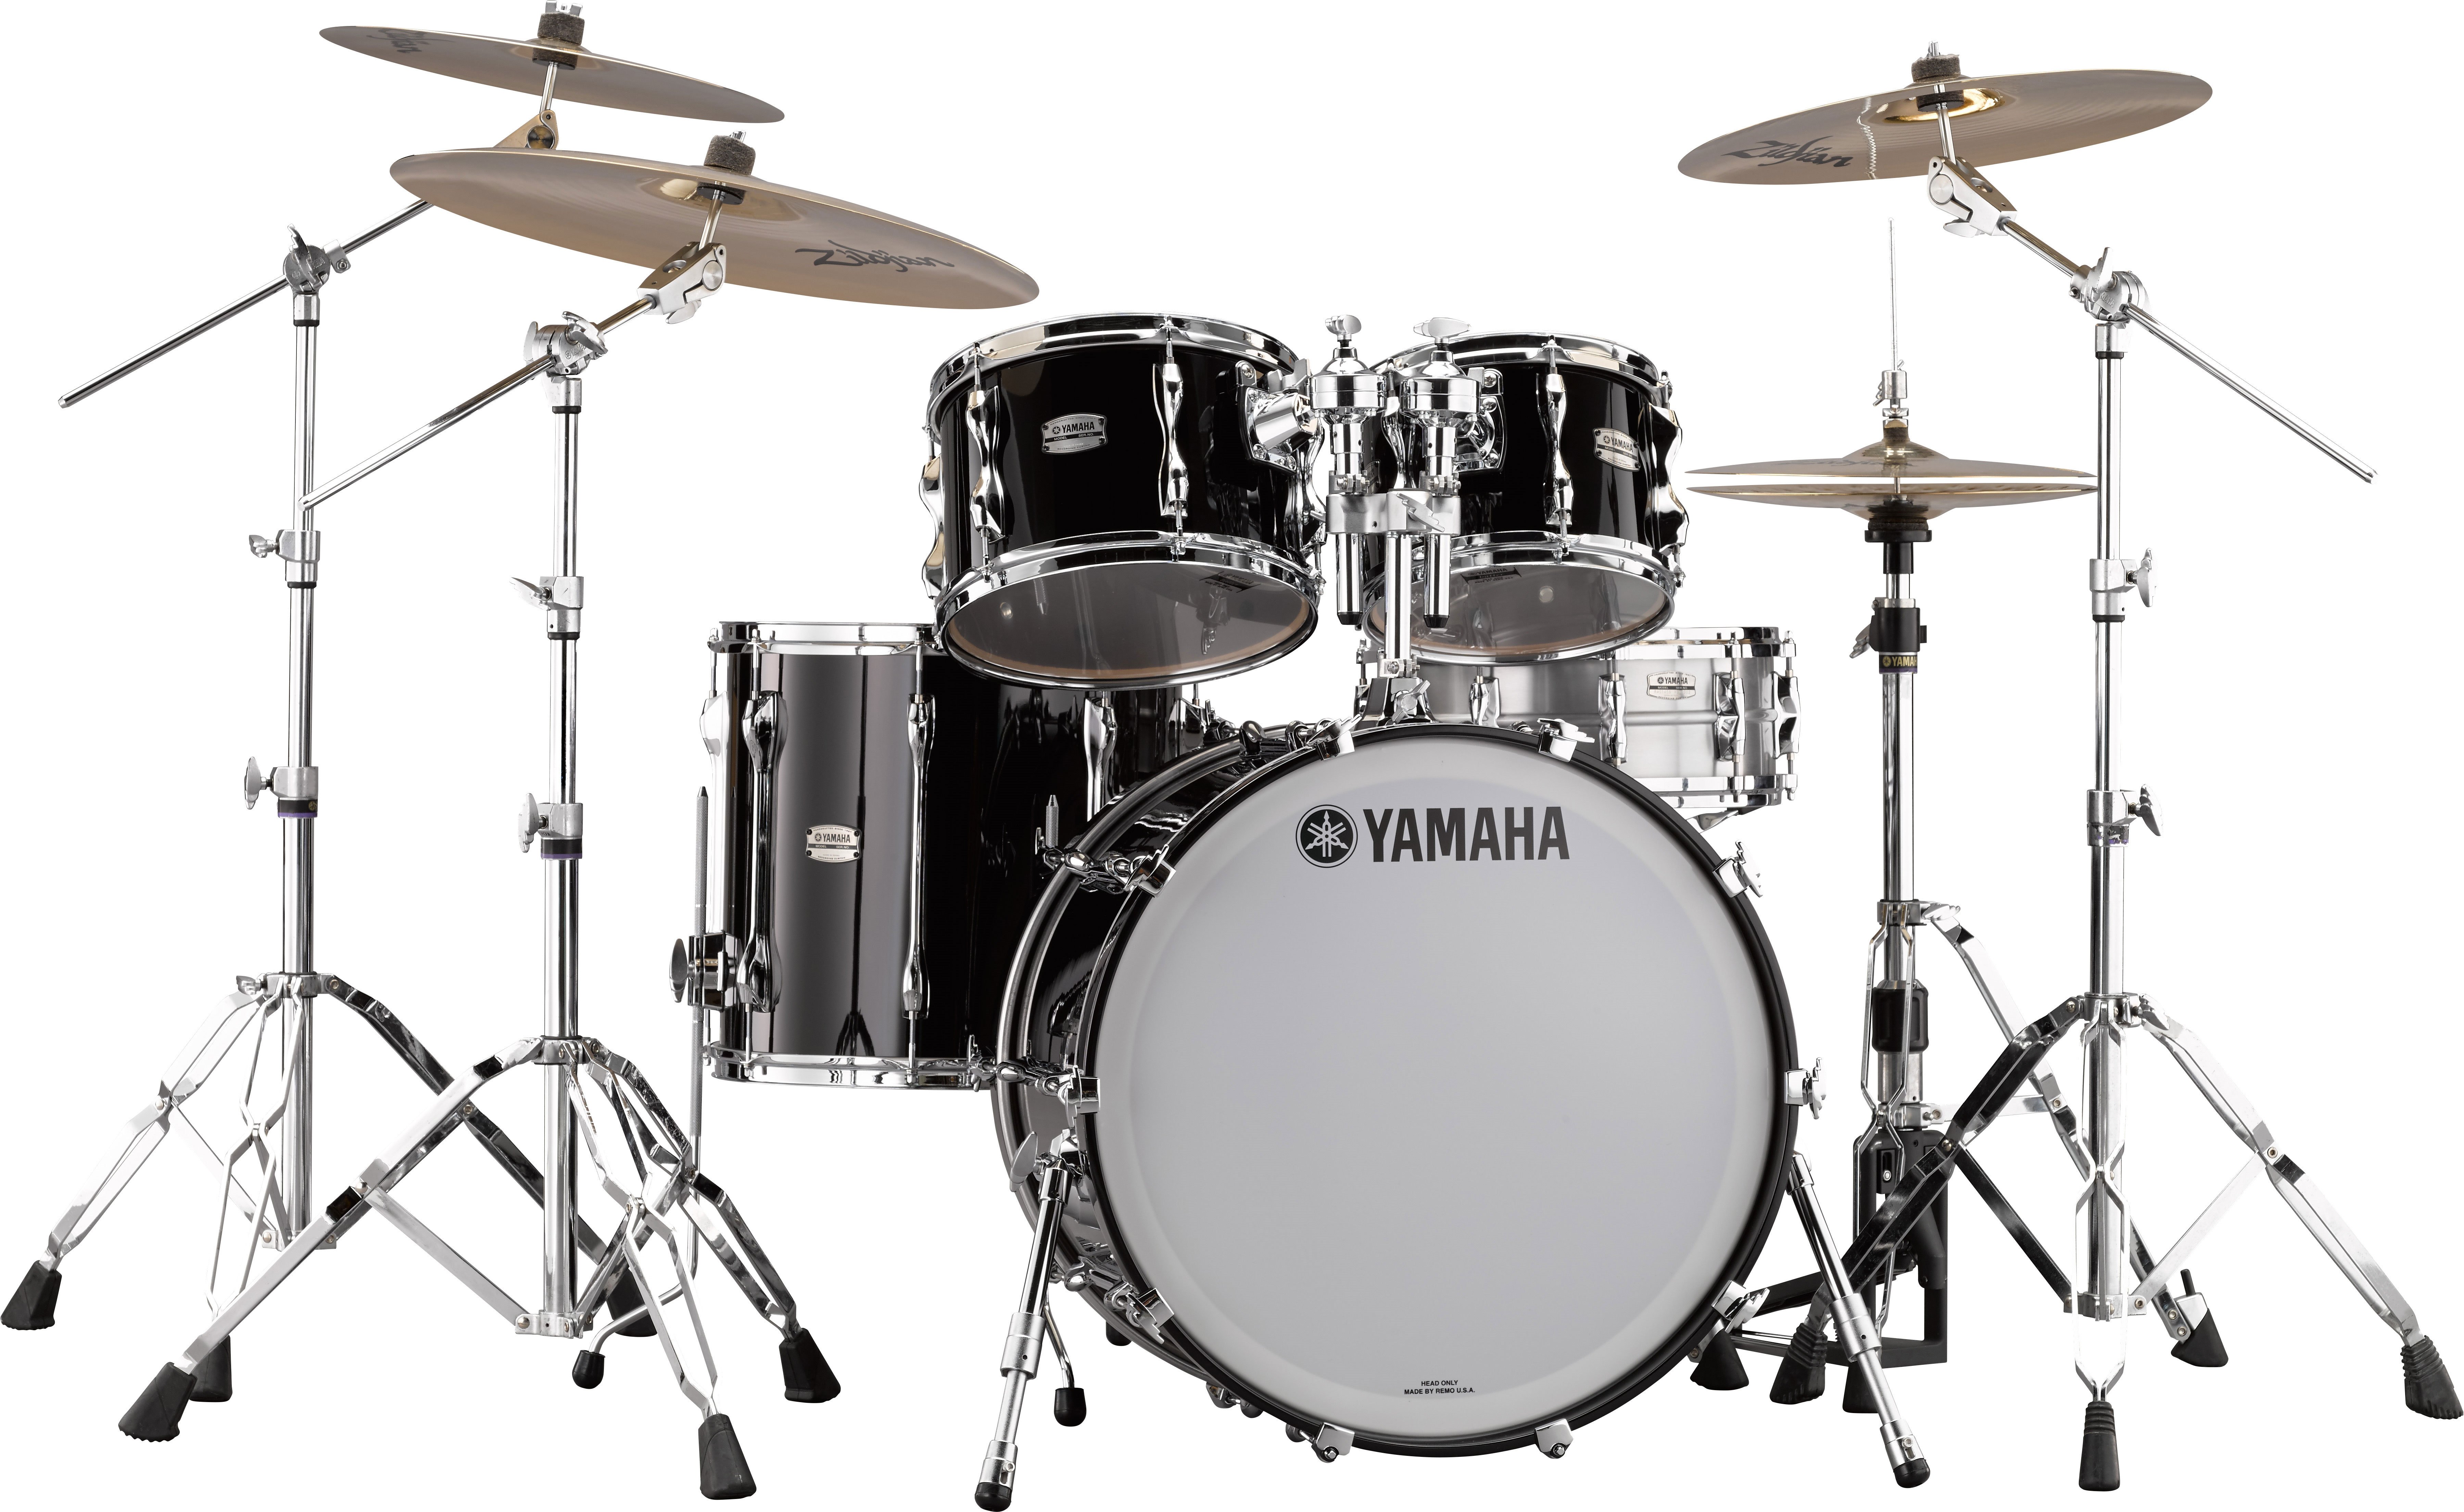 scheren Bestrooi organiseren Recording Custom - Overview - Drum Sets - Acoustic Drums - Drums - Musical  Instruments - Products - Yamaha - United States